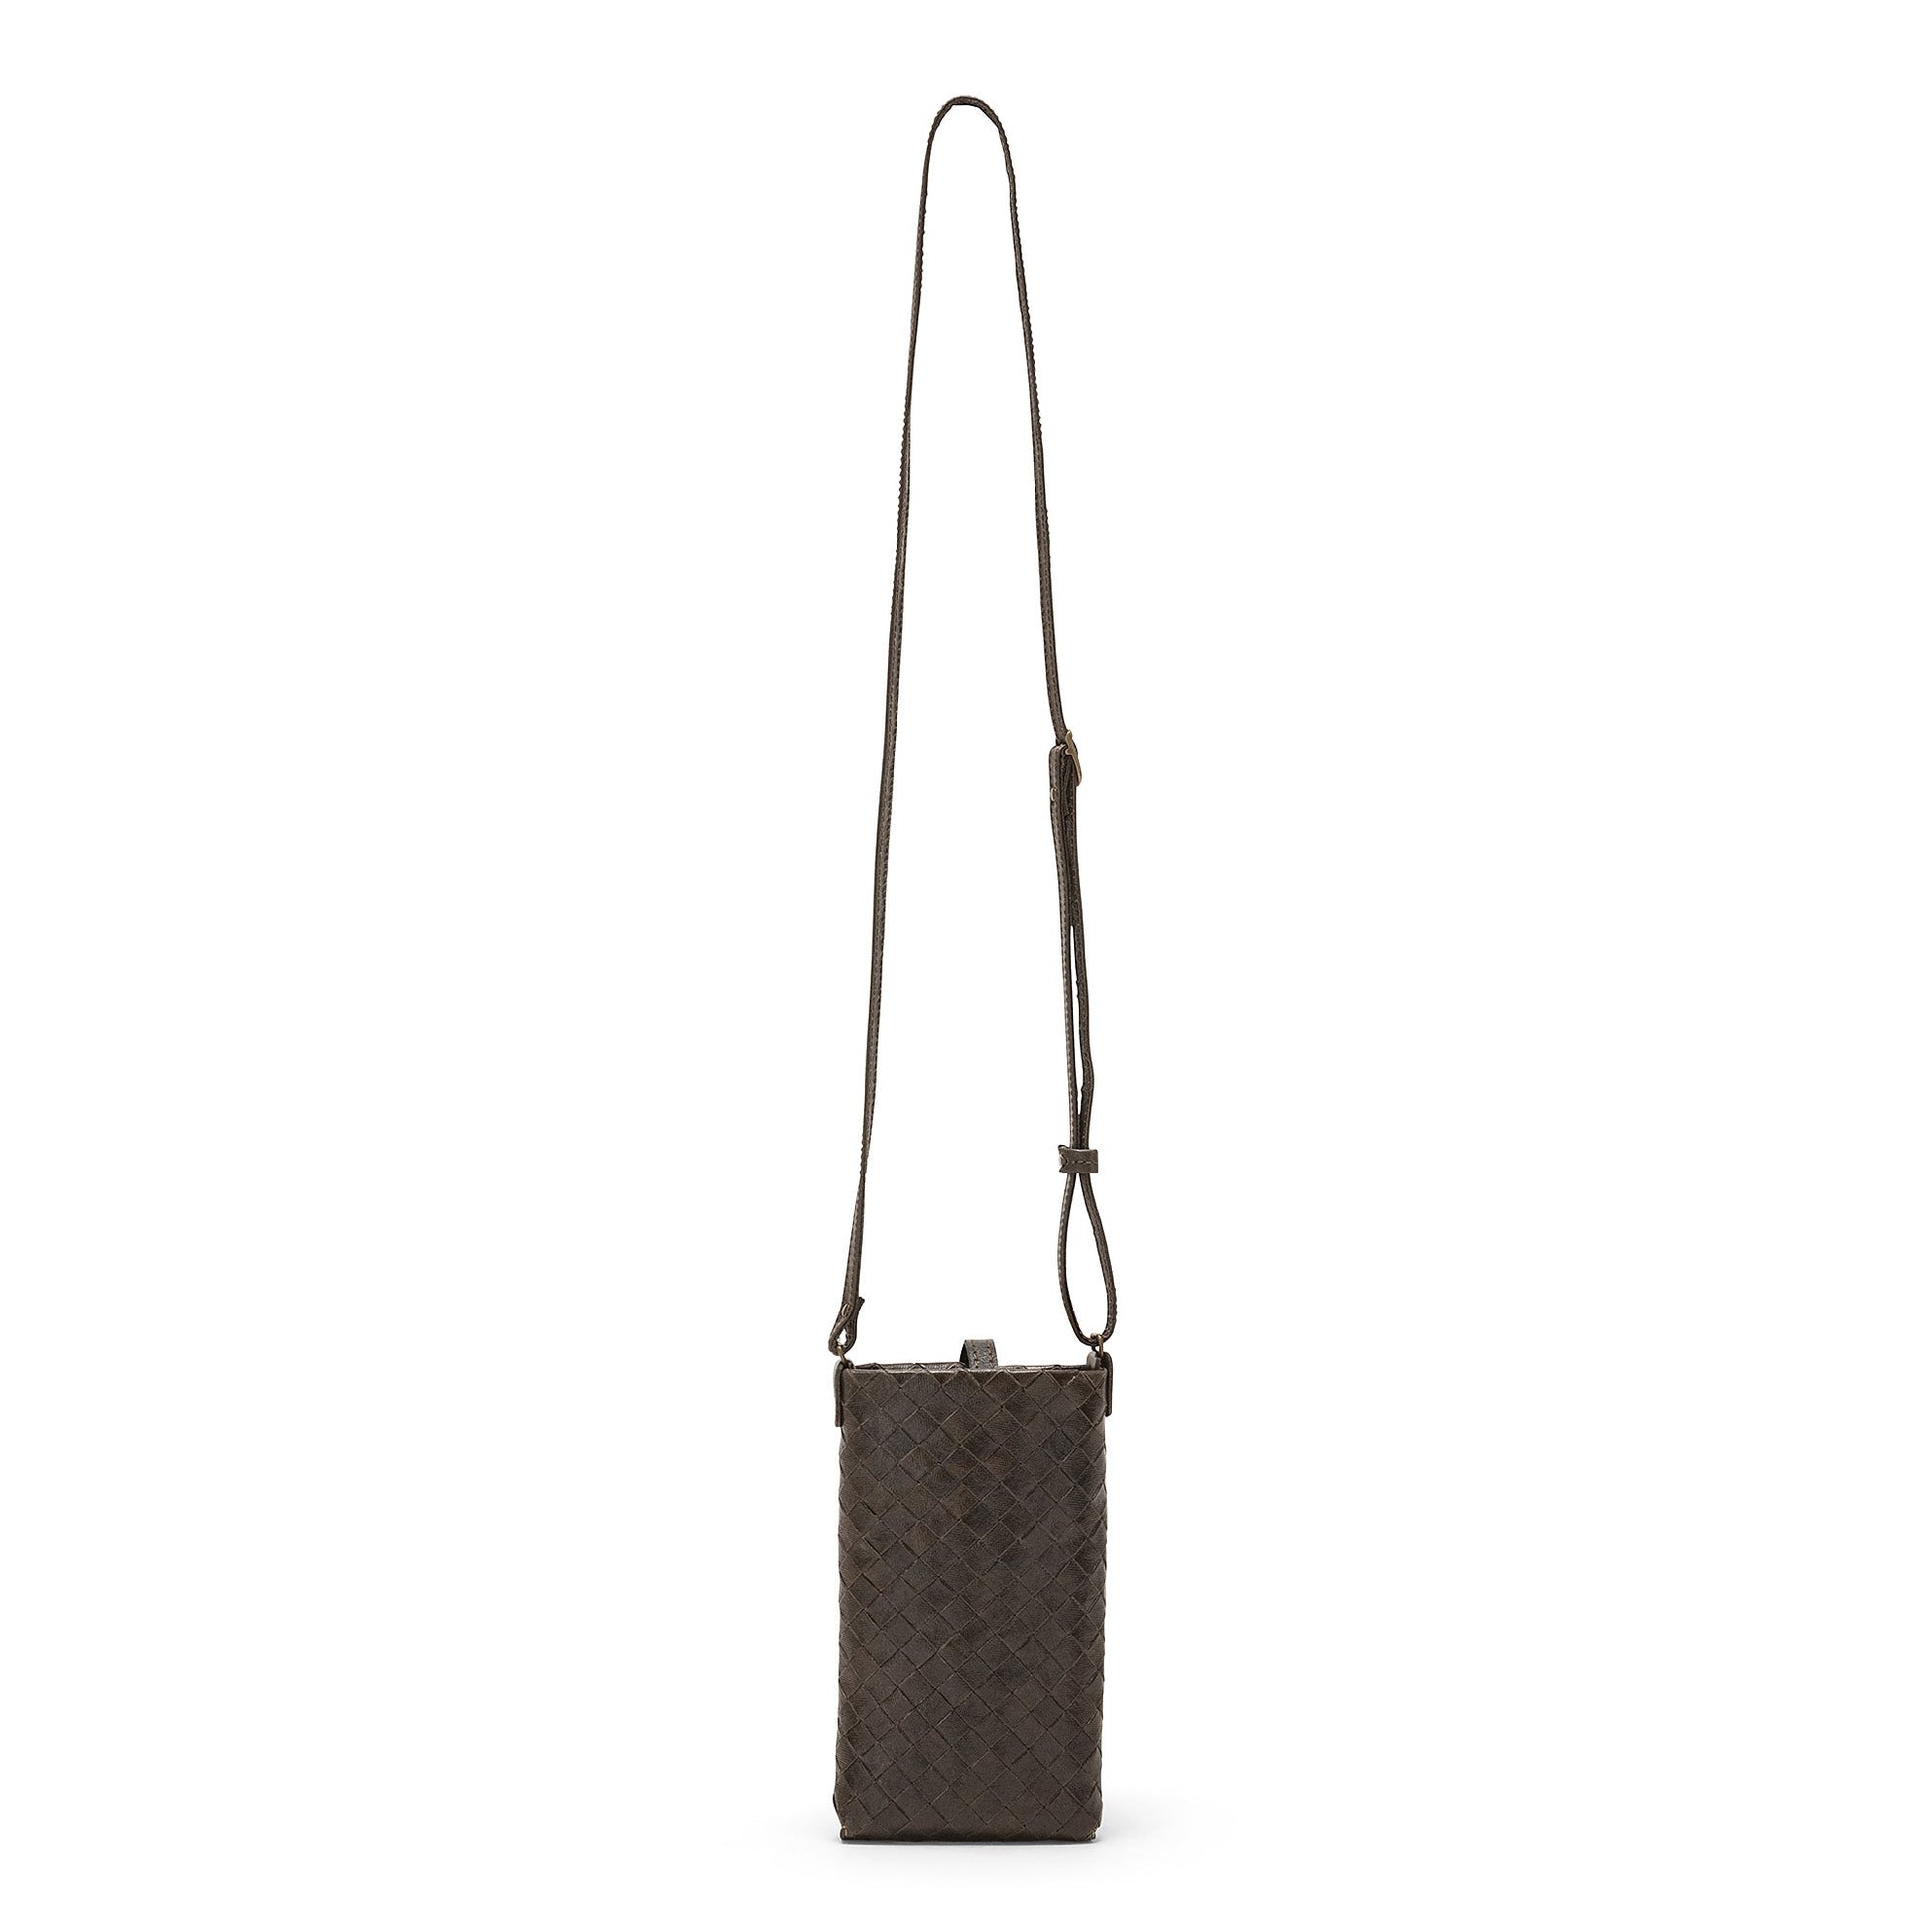 A woven washable paper phone case in dark brown with a long shoulder strap.